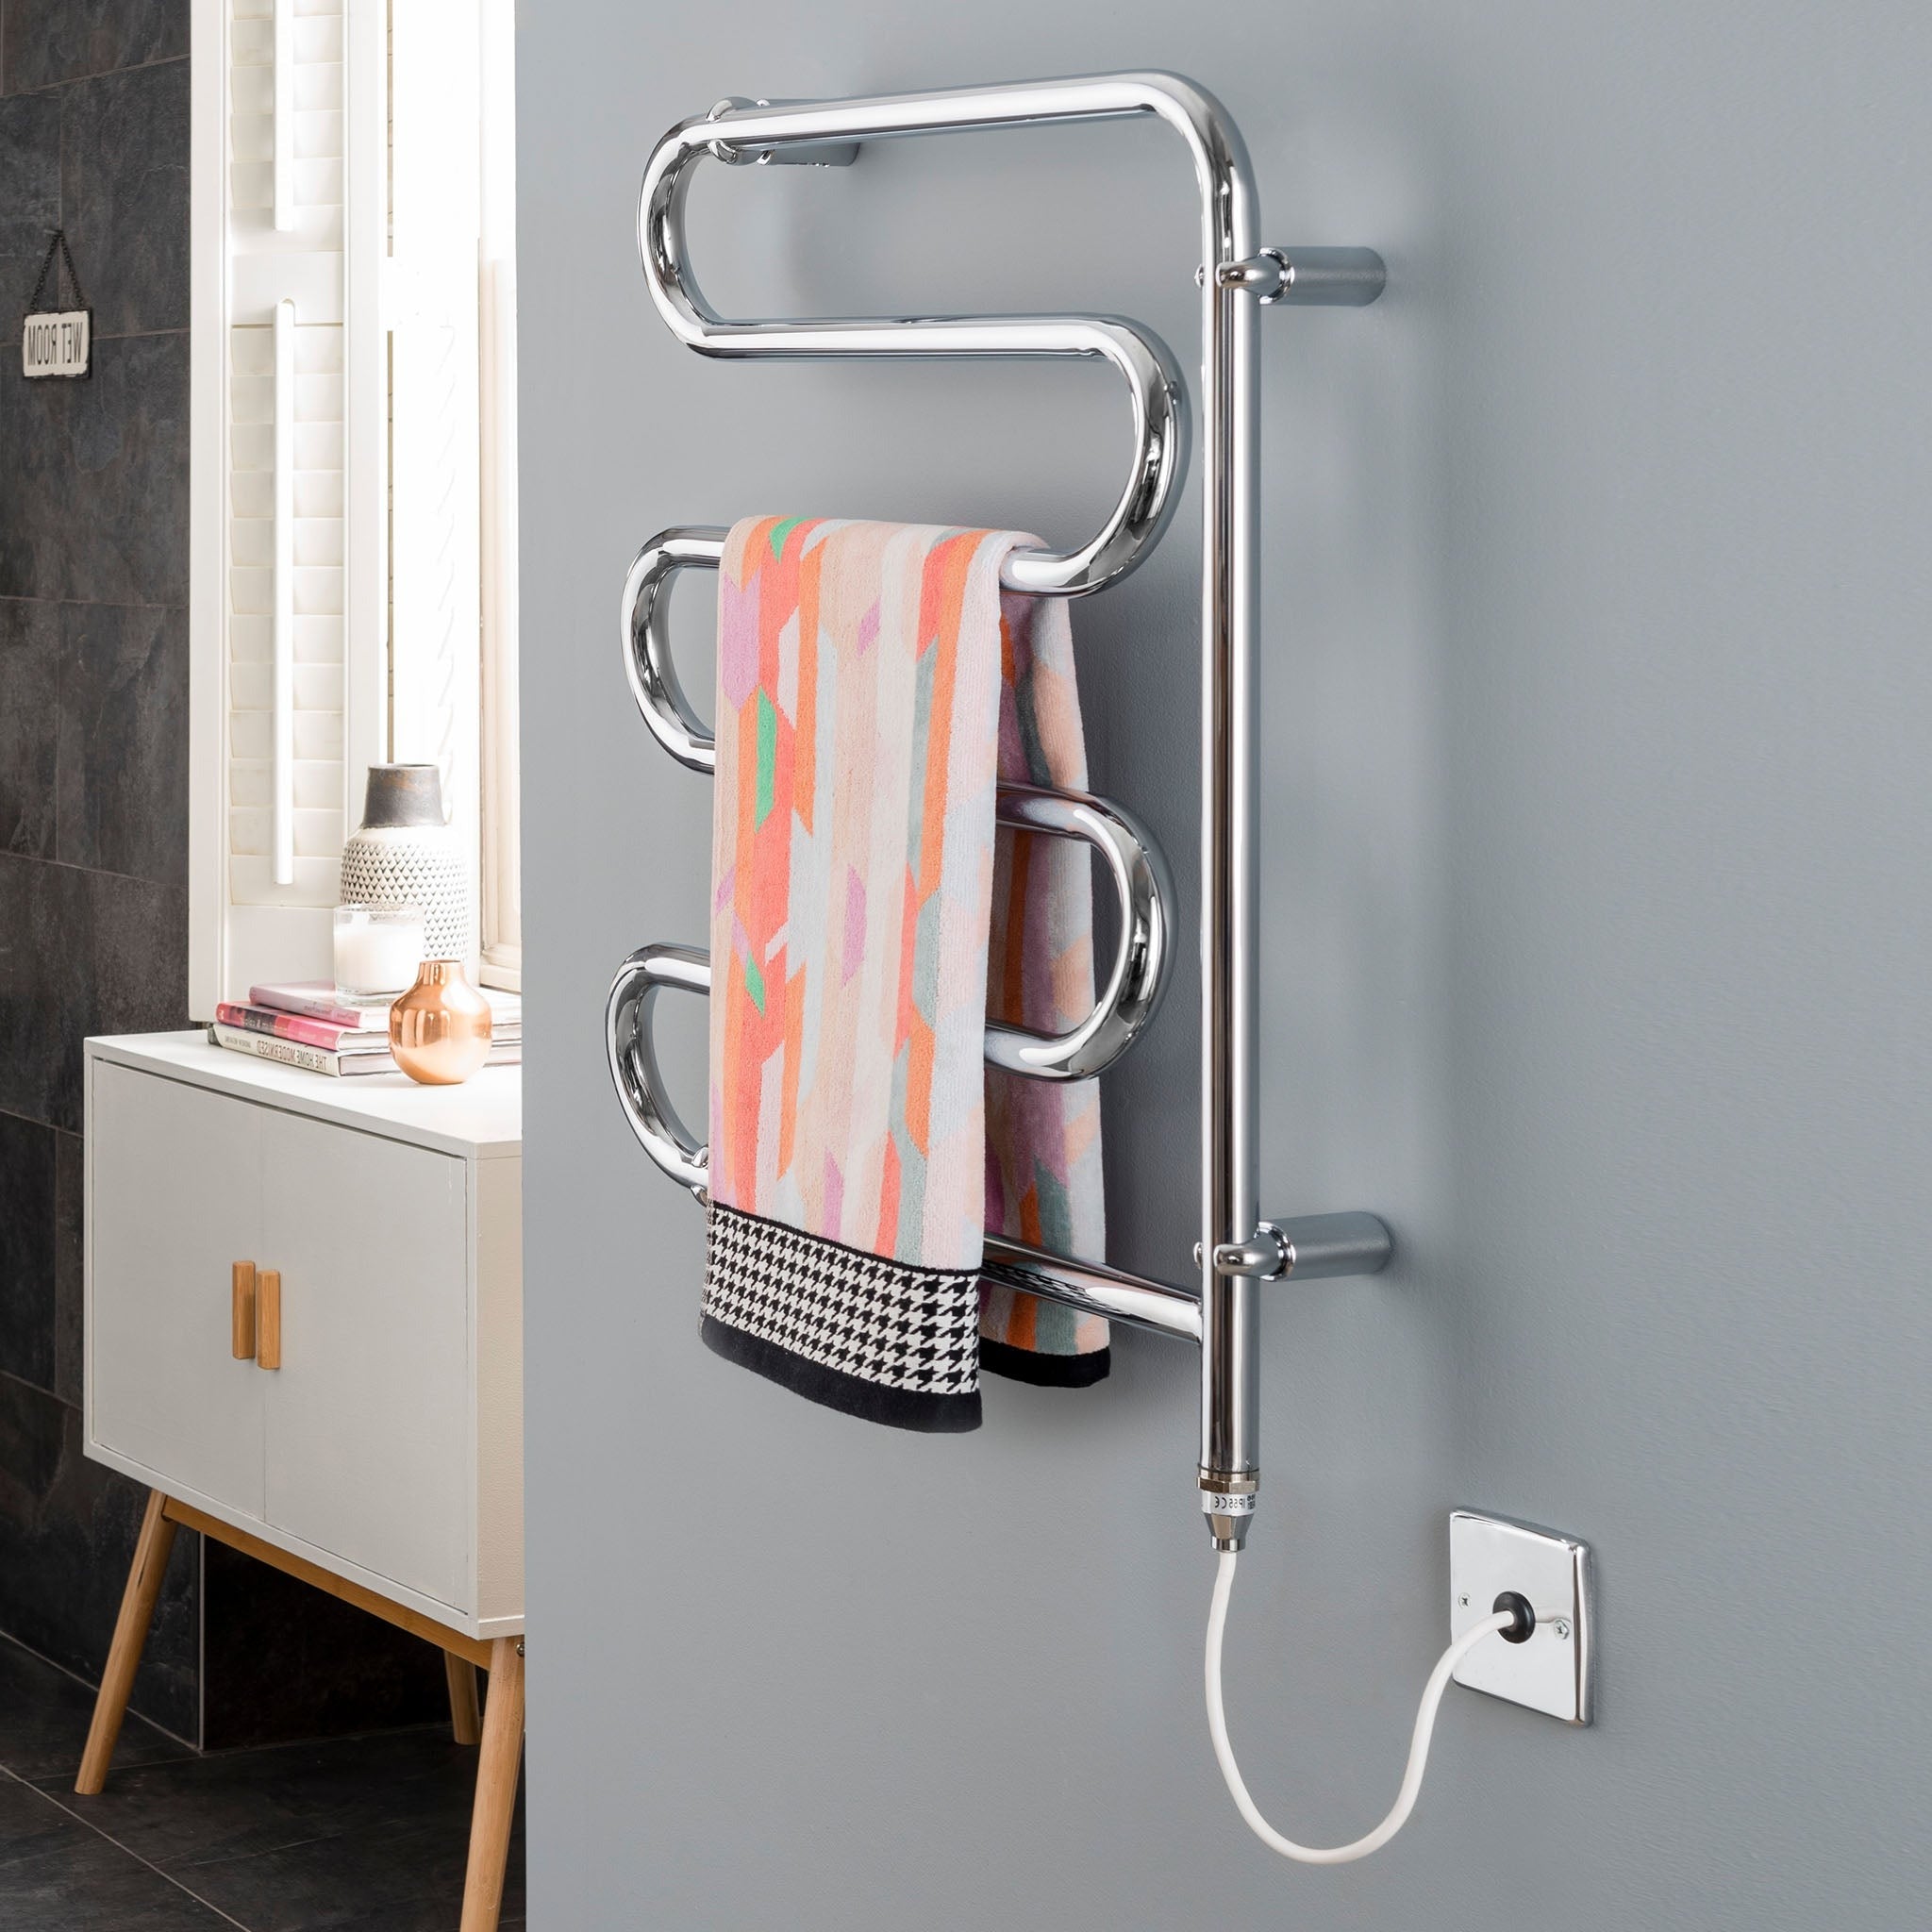 Vogue Comfort Electric Wall Mounted Heated Towel Rail 675 x 545mm